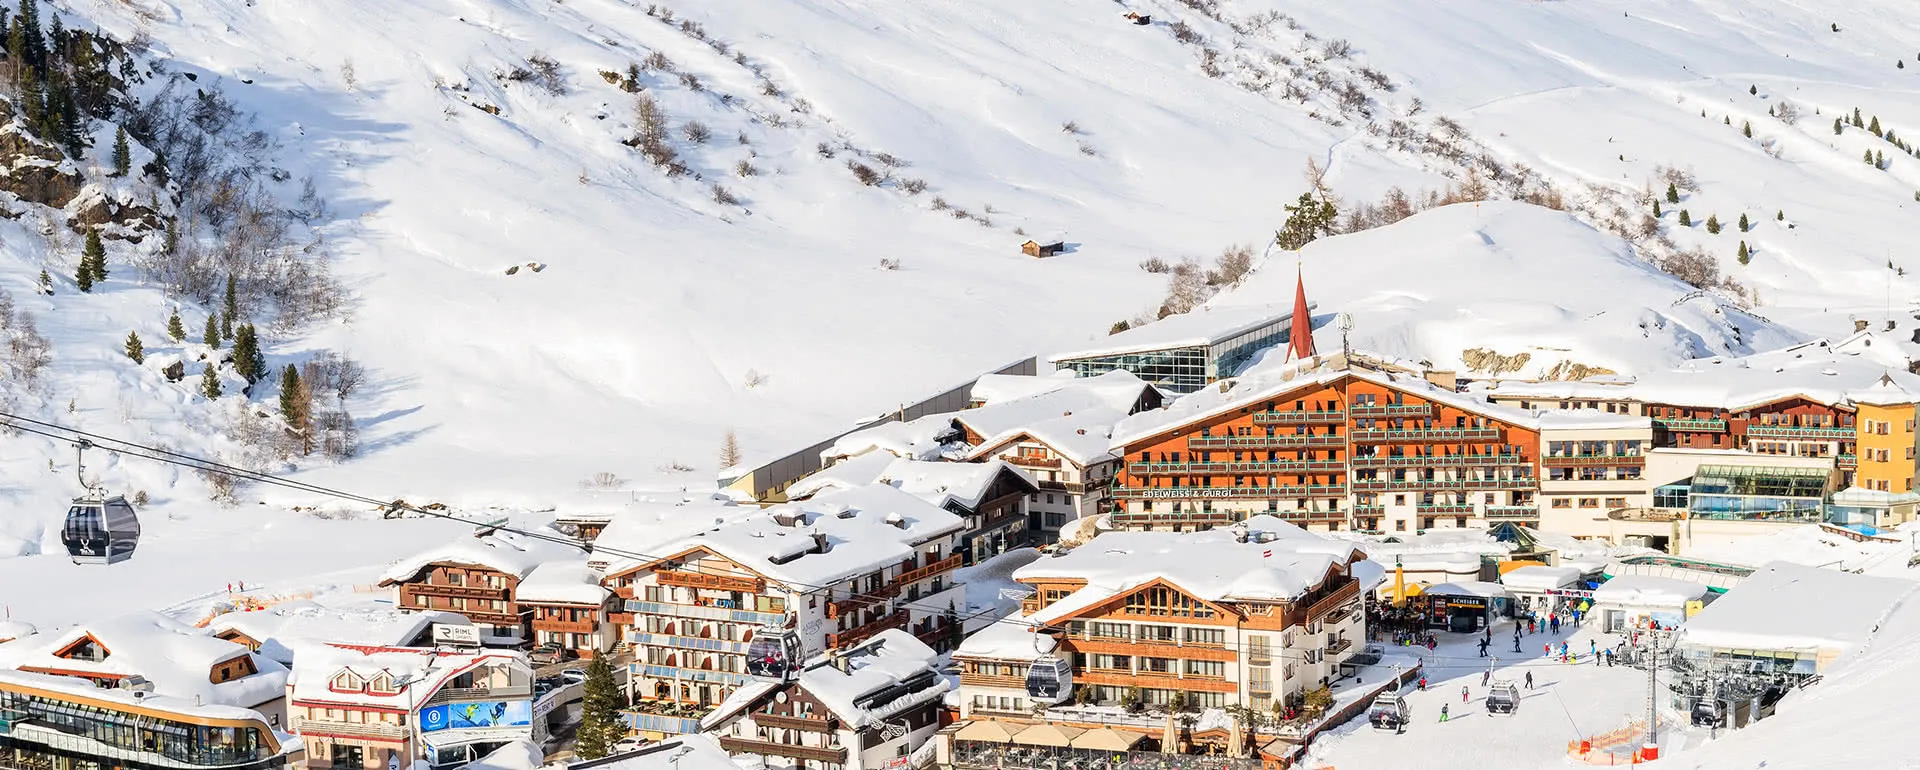 Meeting and conference location Obergurgl